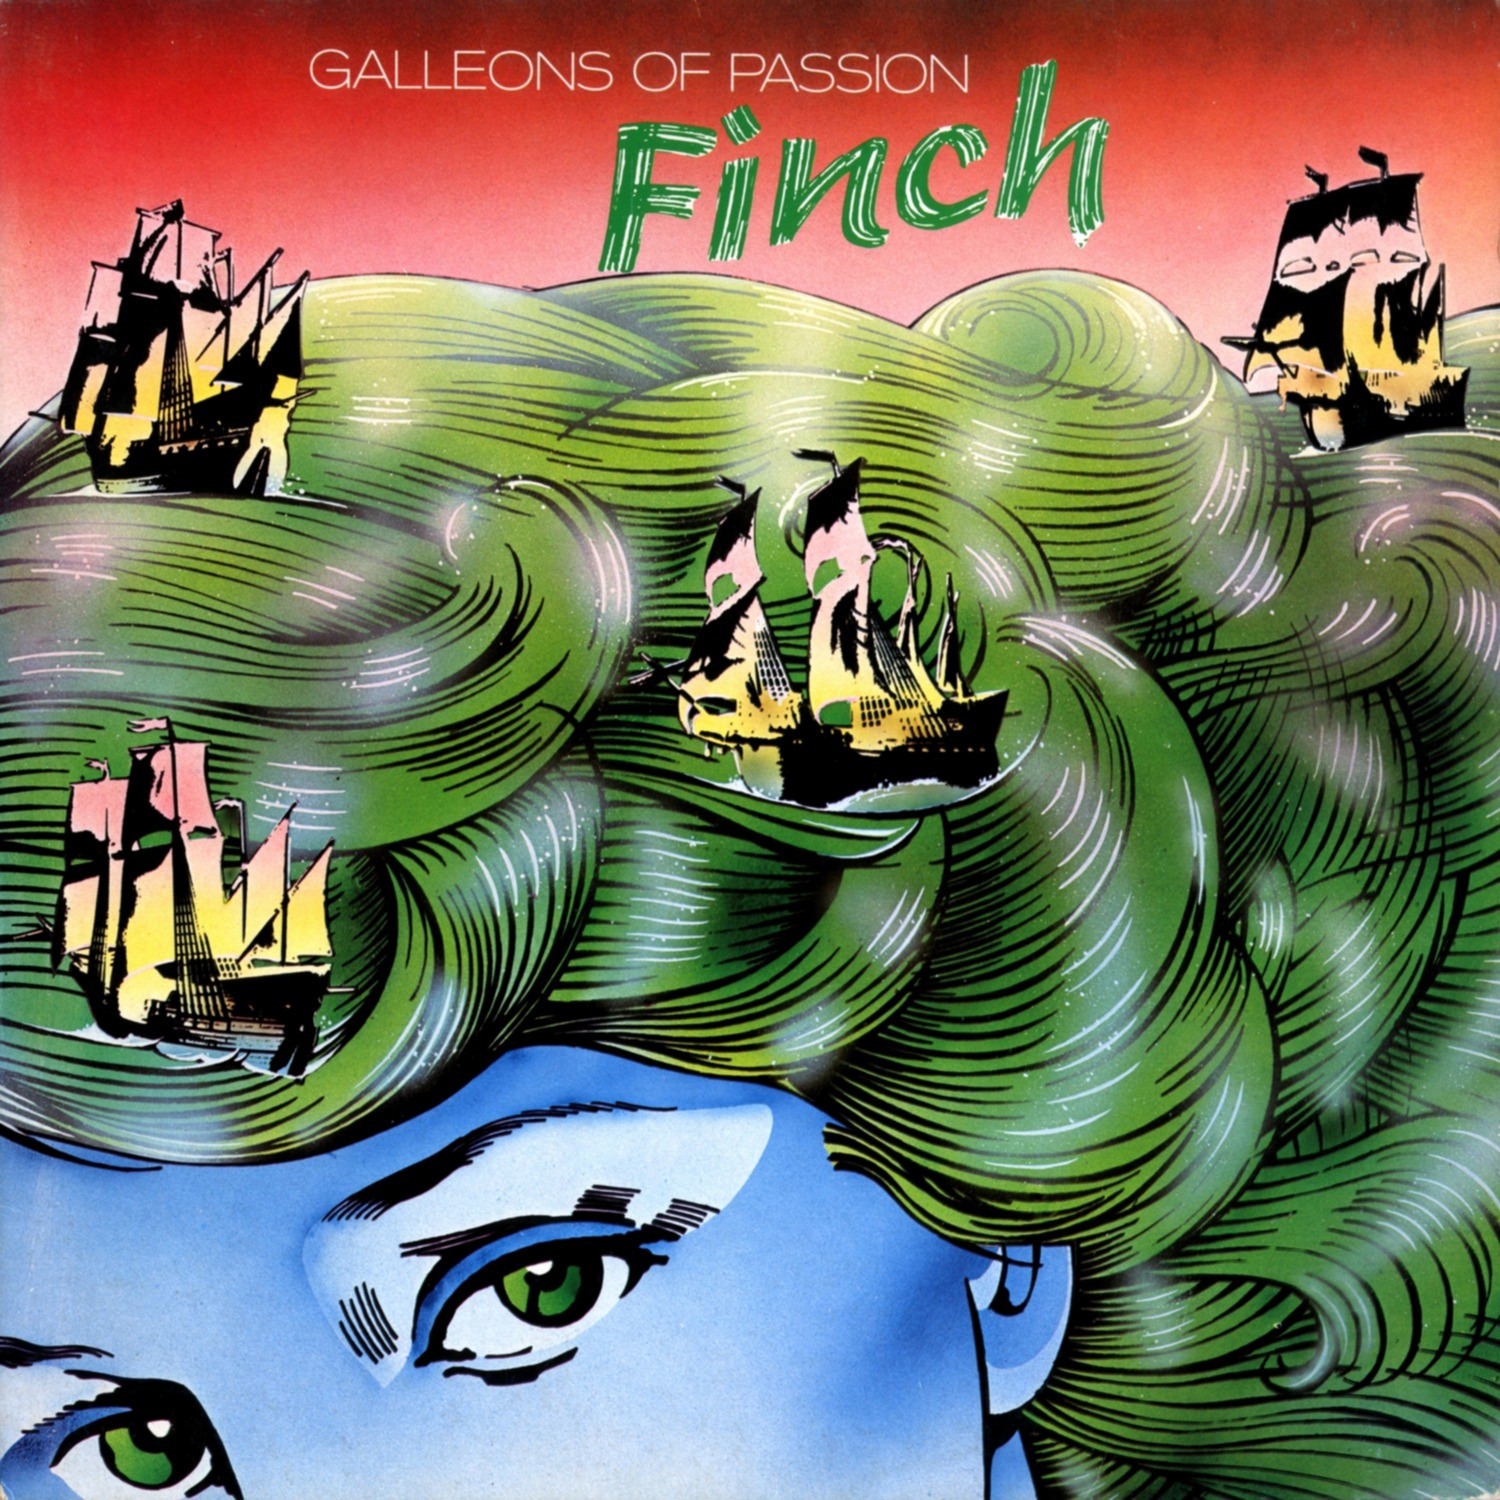 FINCH - GALLEONS OF PASSION